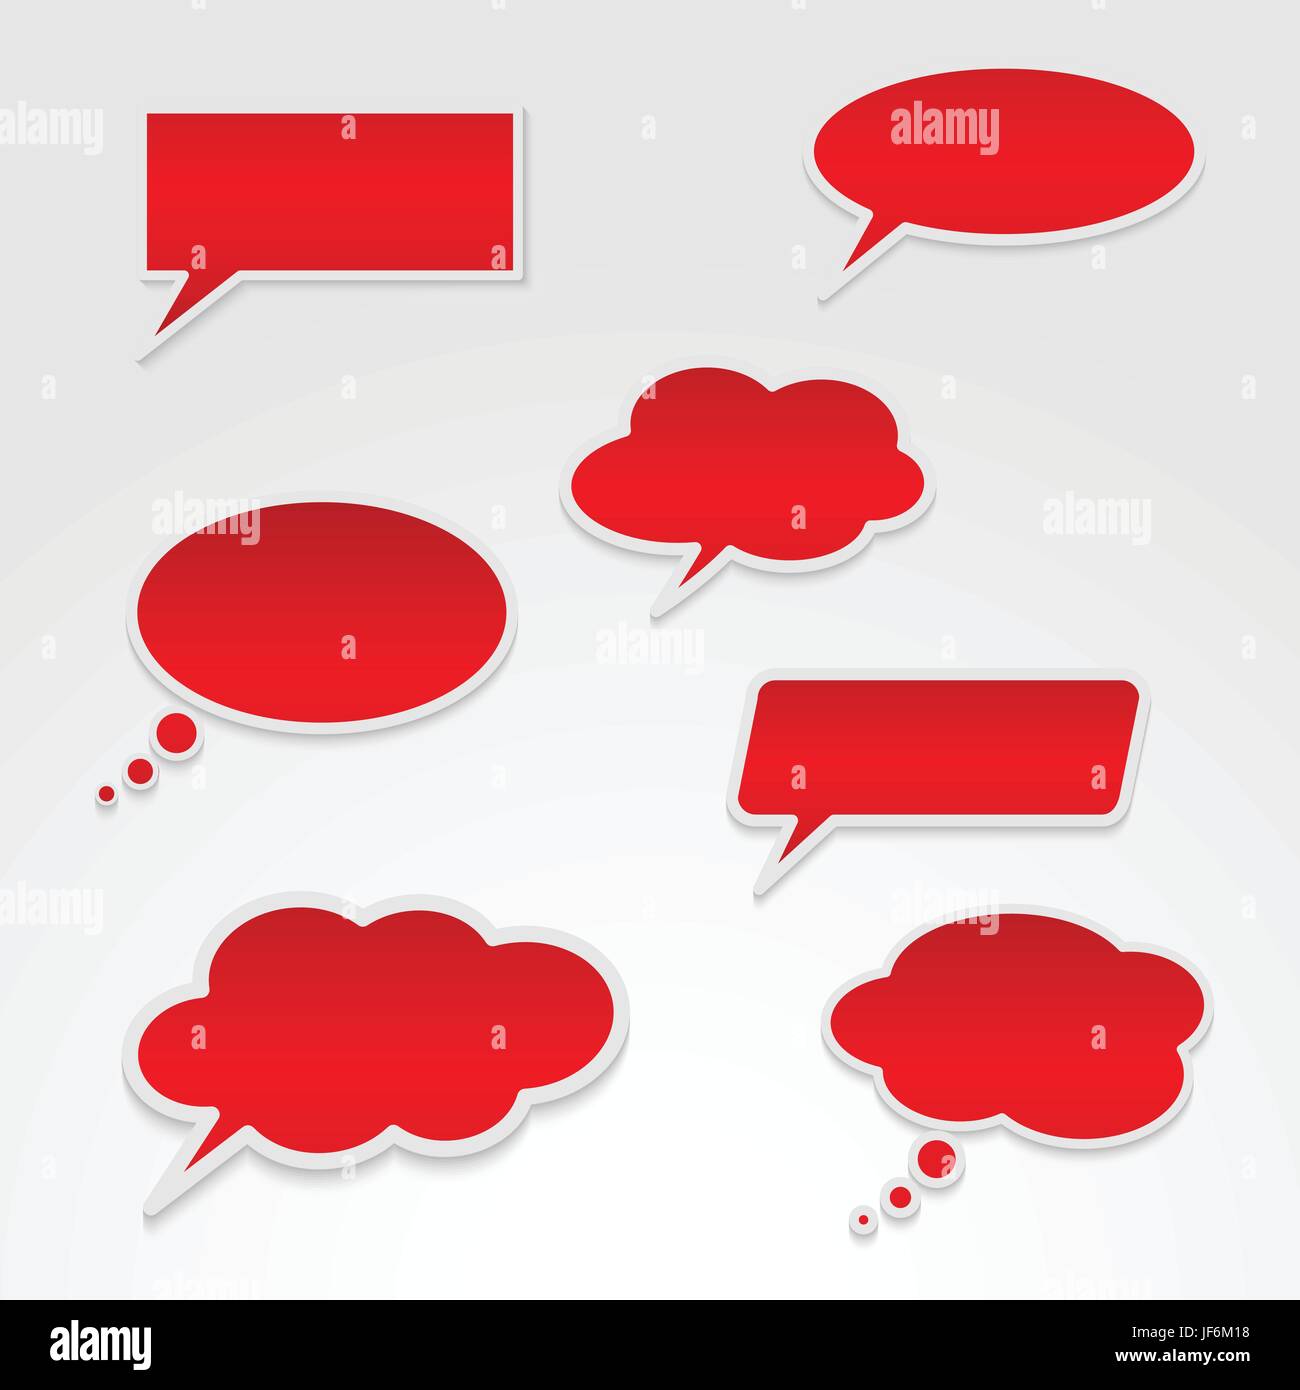 cloud, idea, perspective, point of view, approach, view, opinion, angle, think, Stock Vector